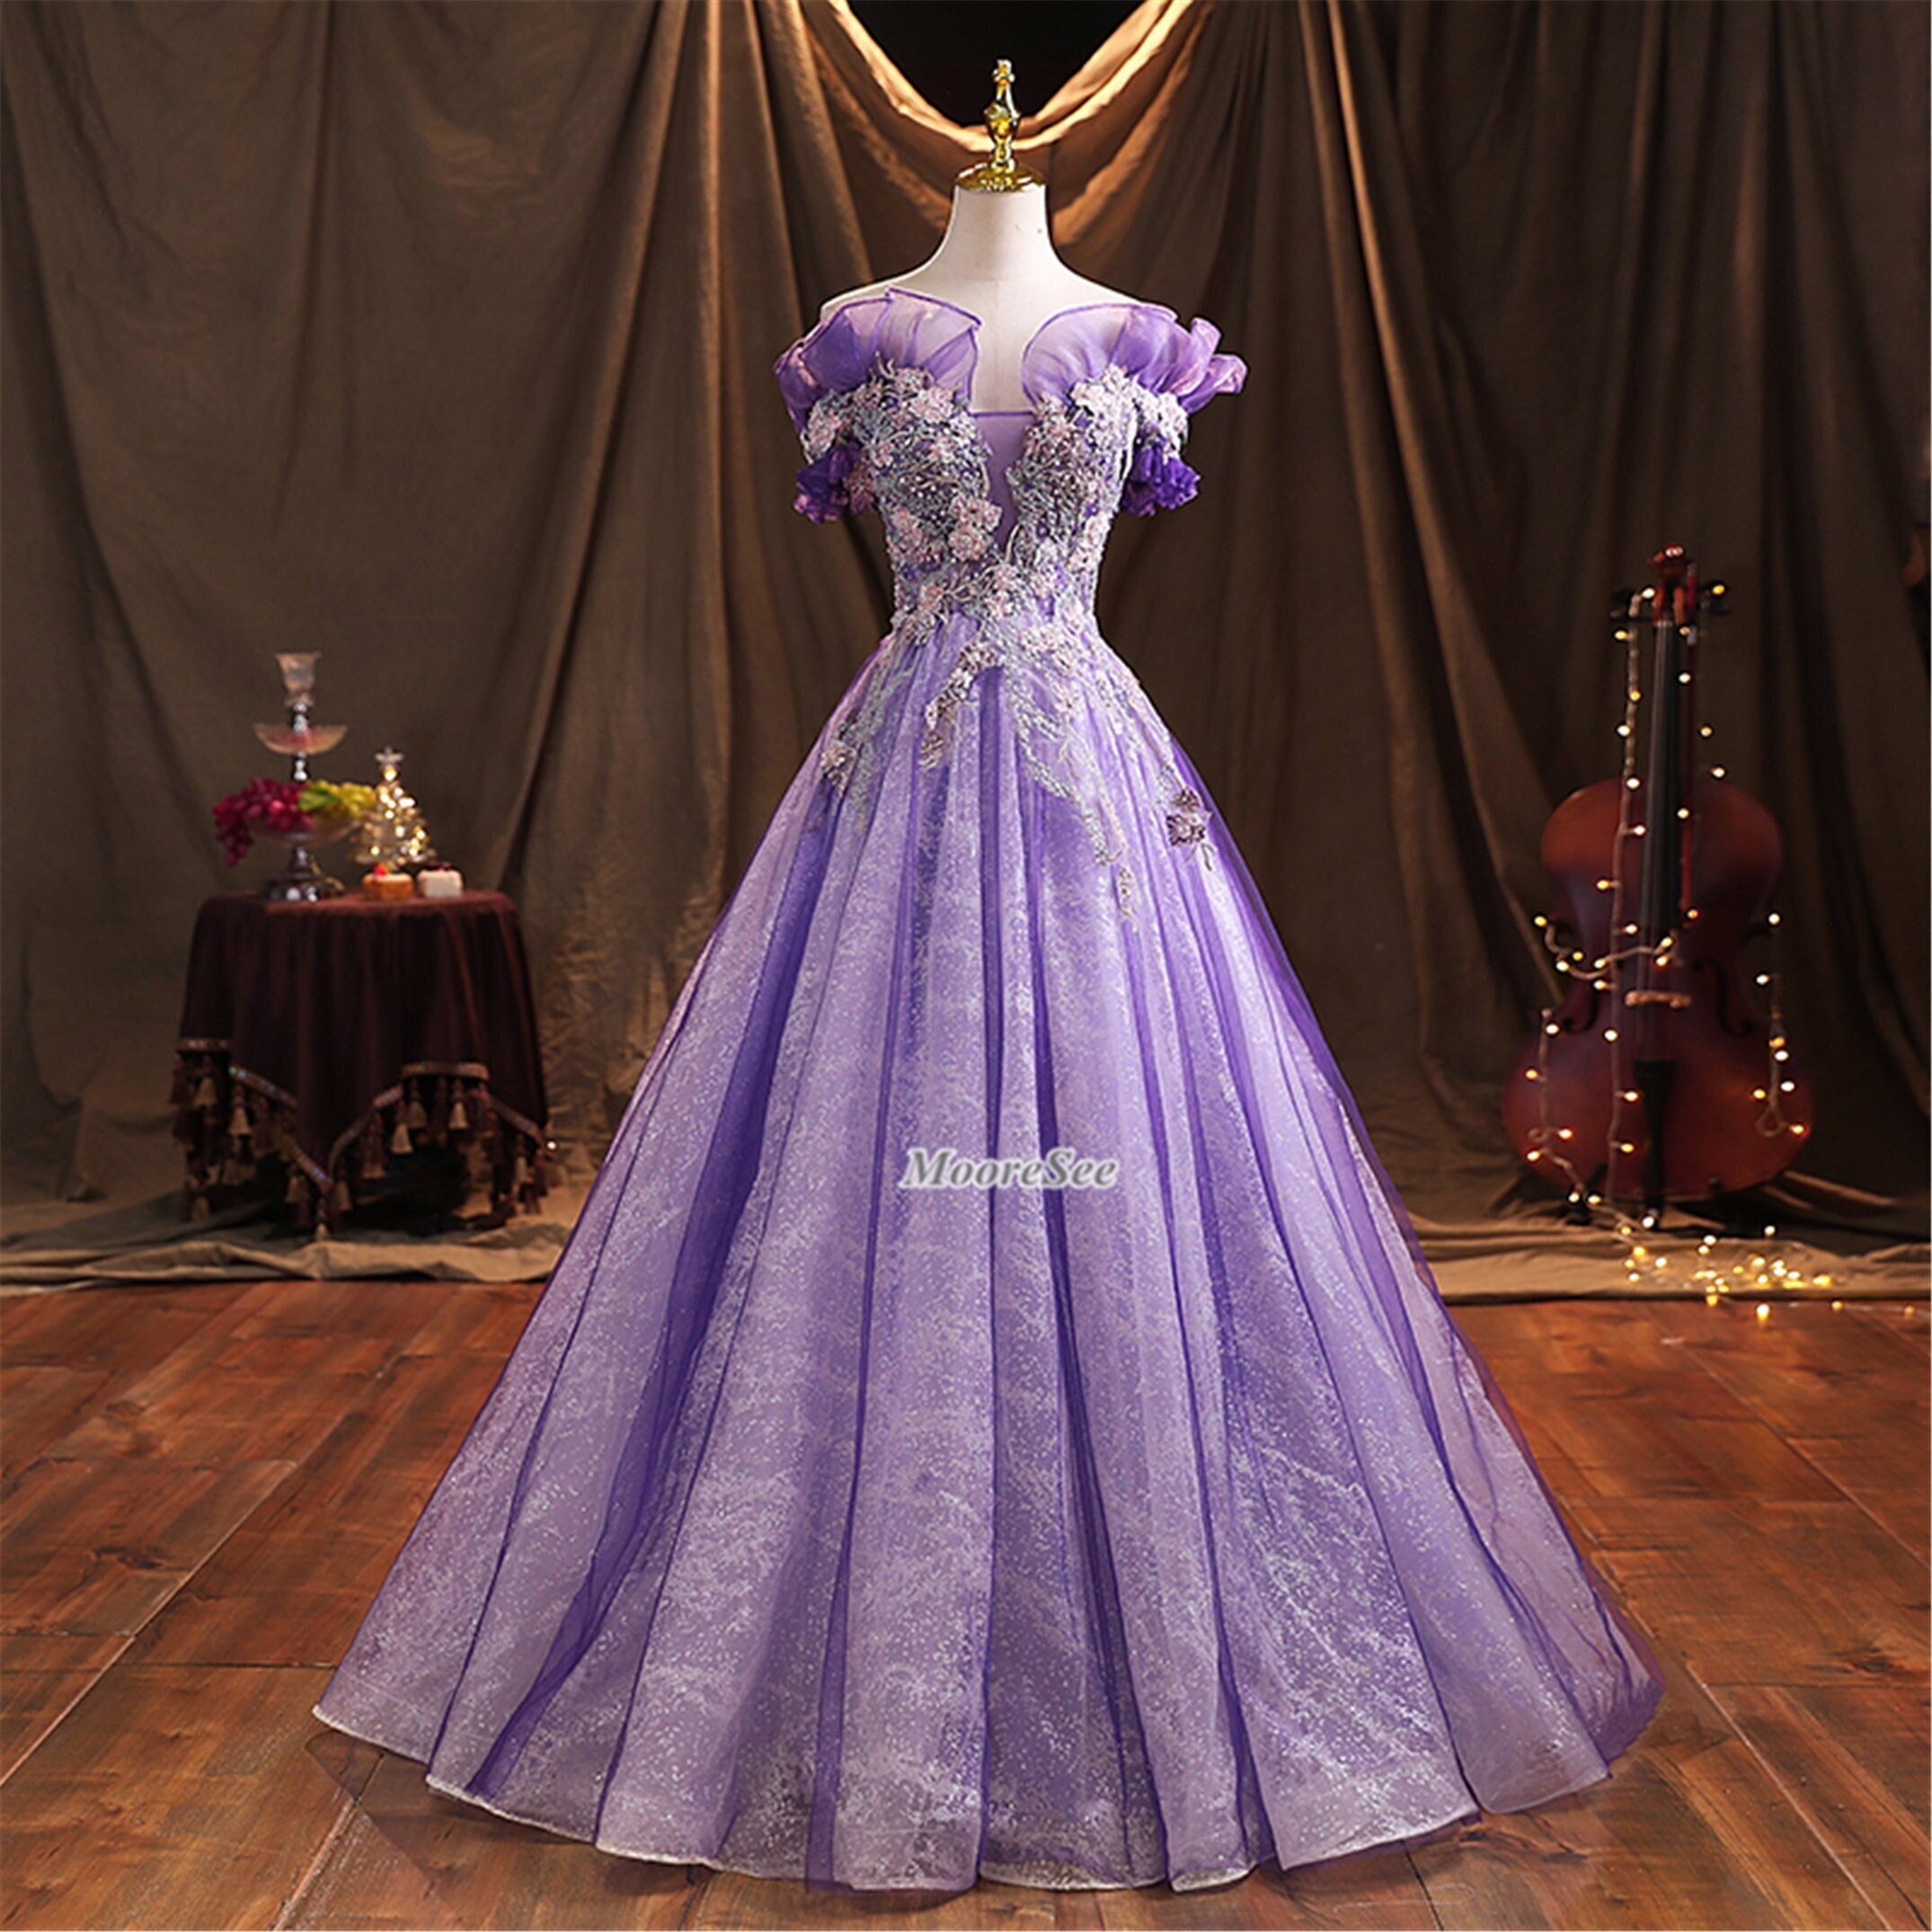 Elegant Purple Ball Gown Prom Dresses,Real Picture Floor Length Tulle Puffy  Long Prom Dress, Formal Evening Dress · KProm · Online Store Powered by  Storenvy